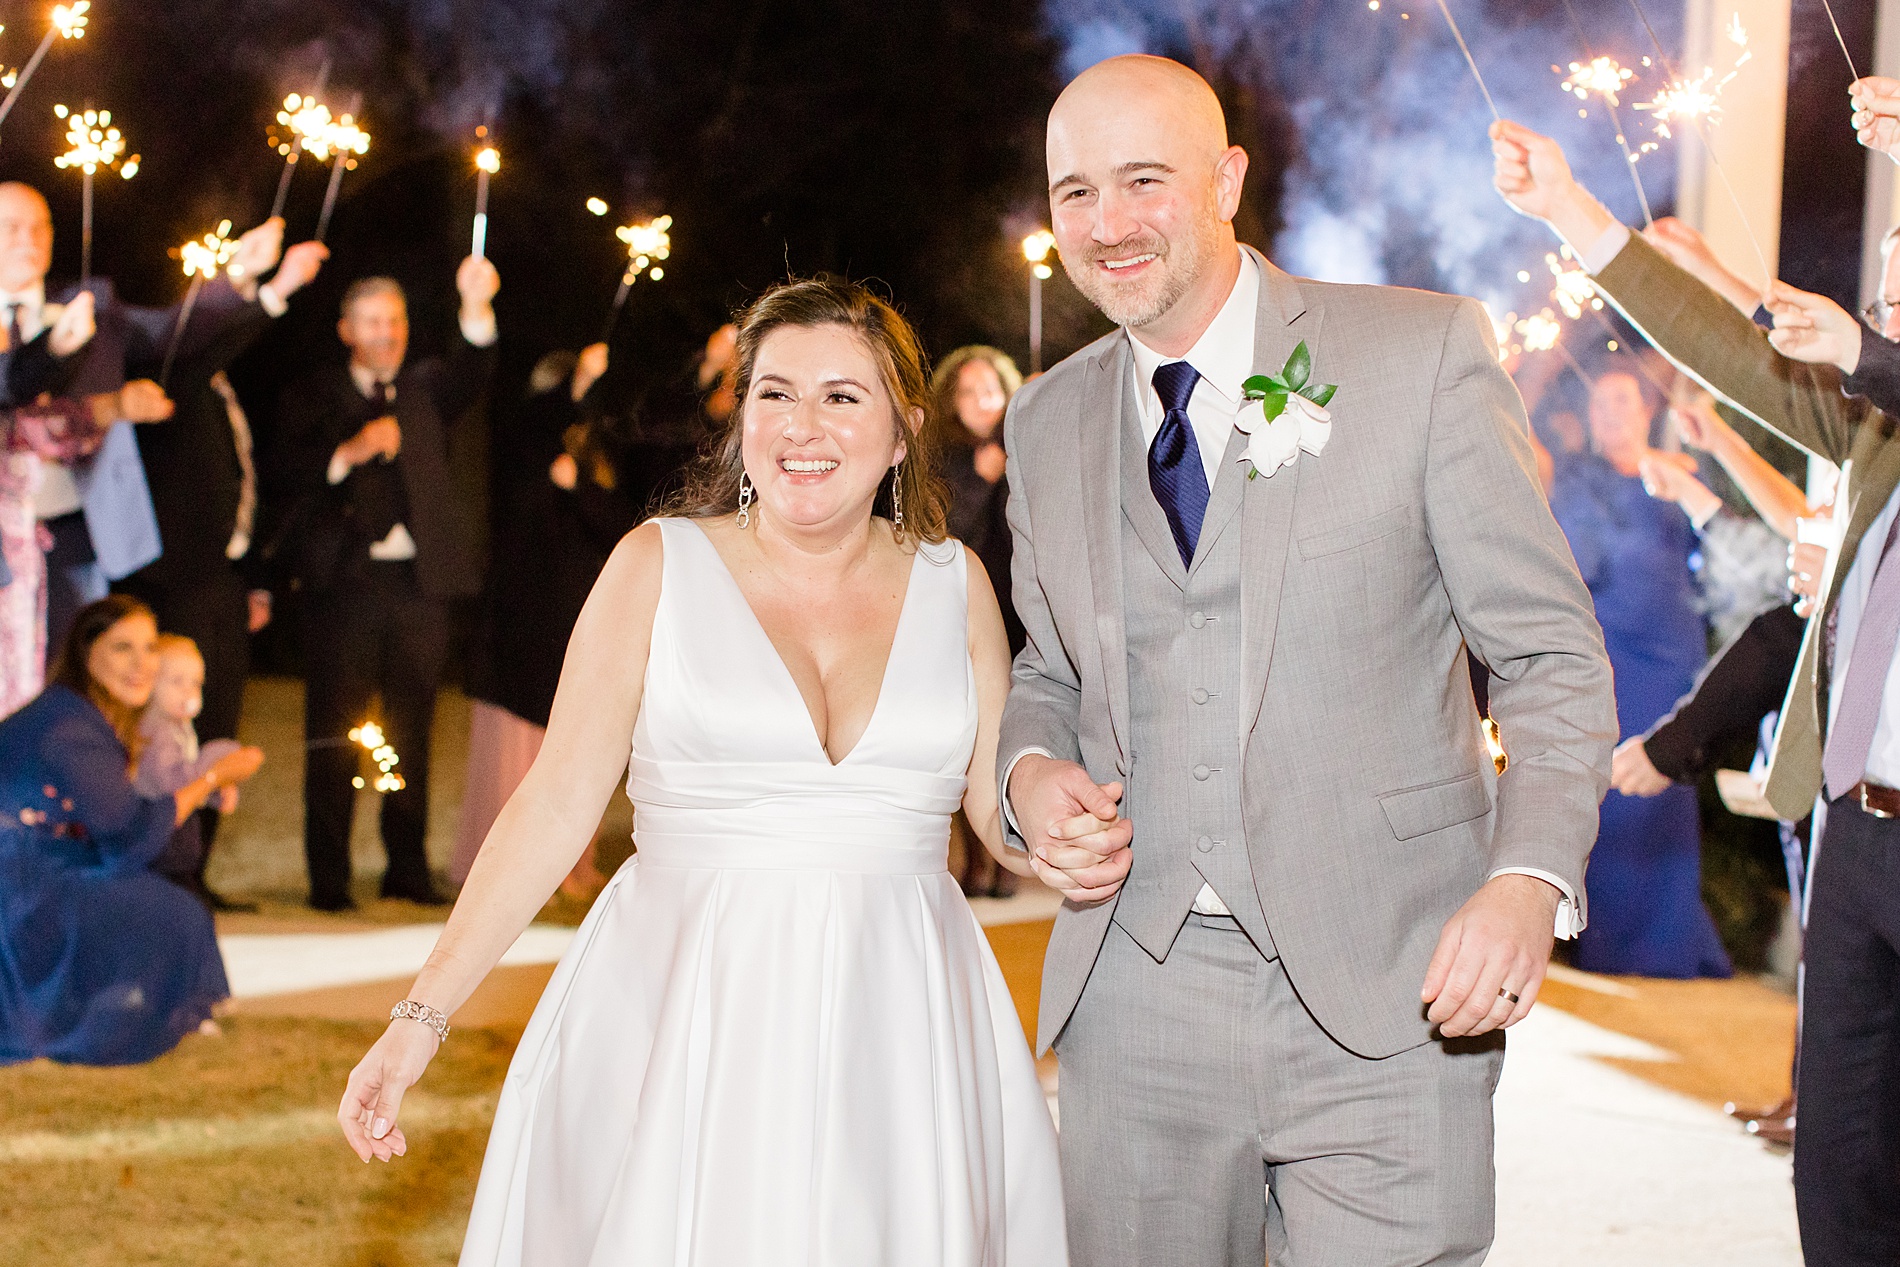 couple exit wedding reception as guests hold sparklers 